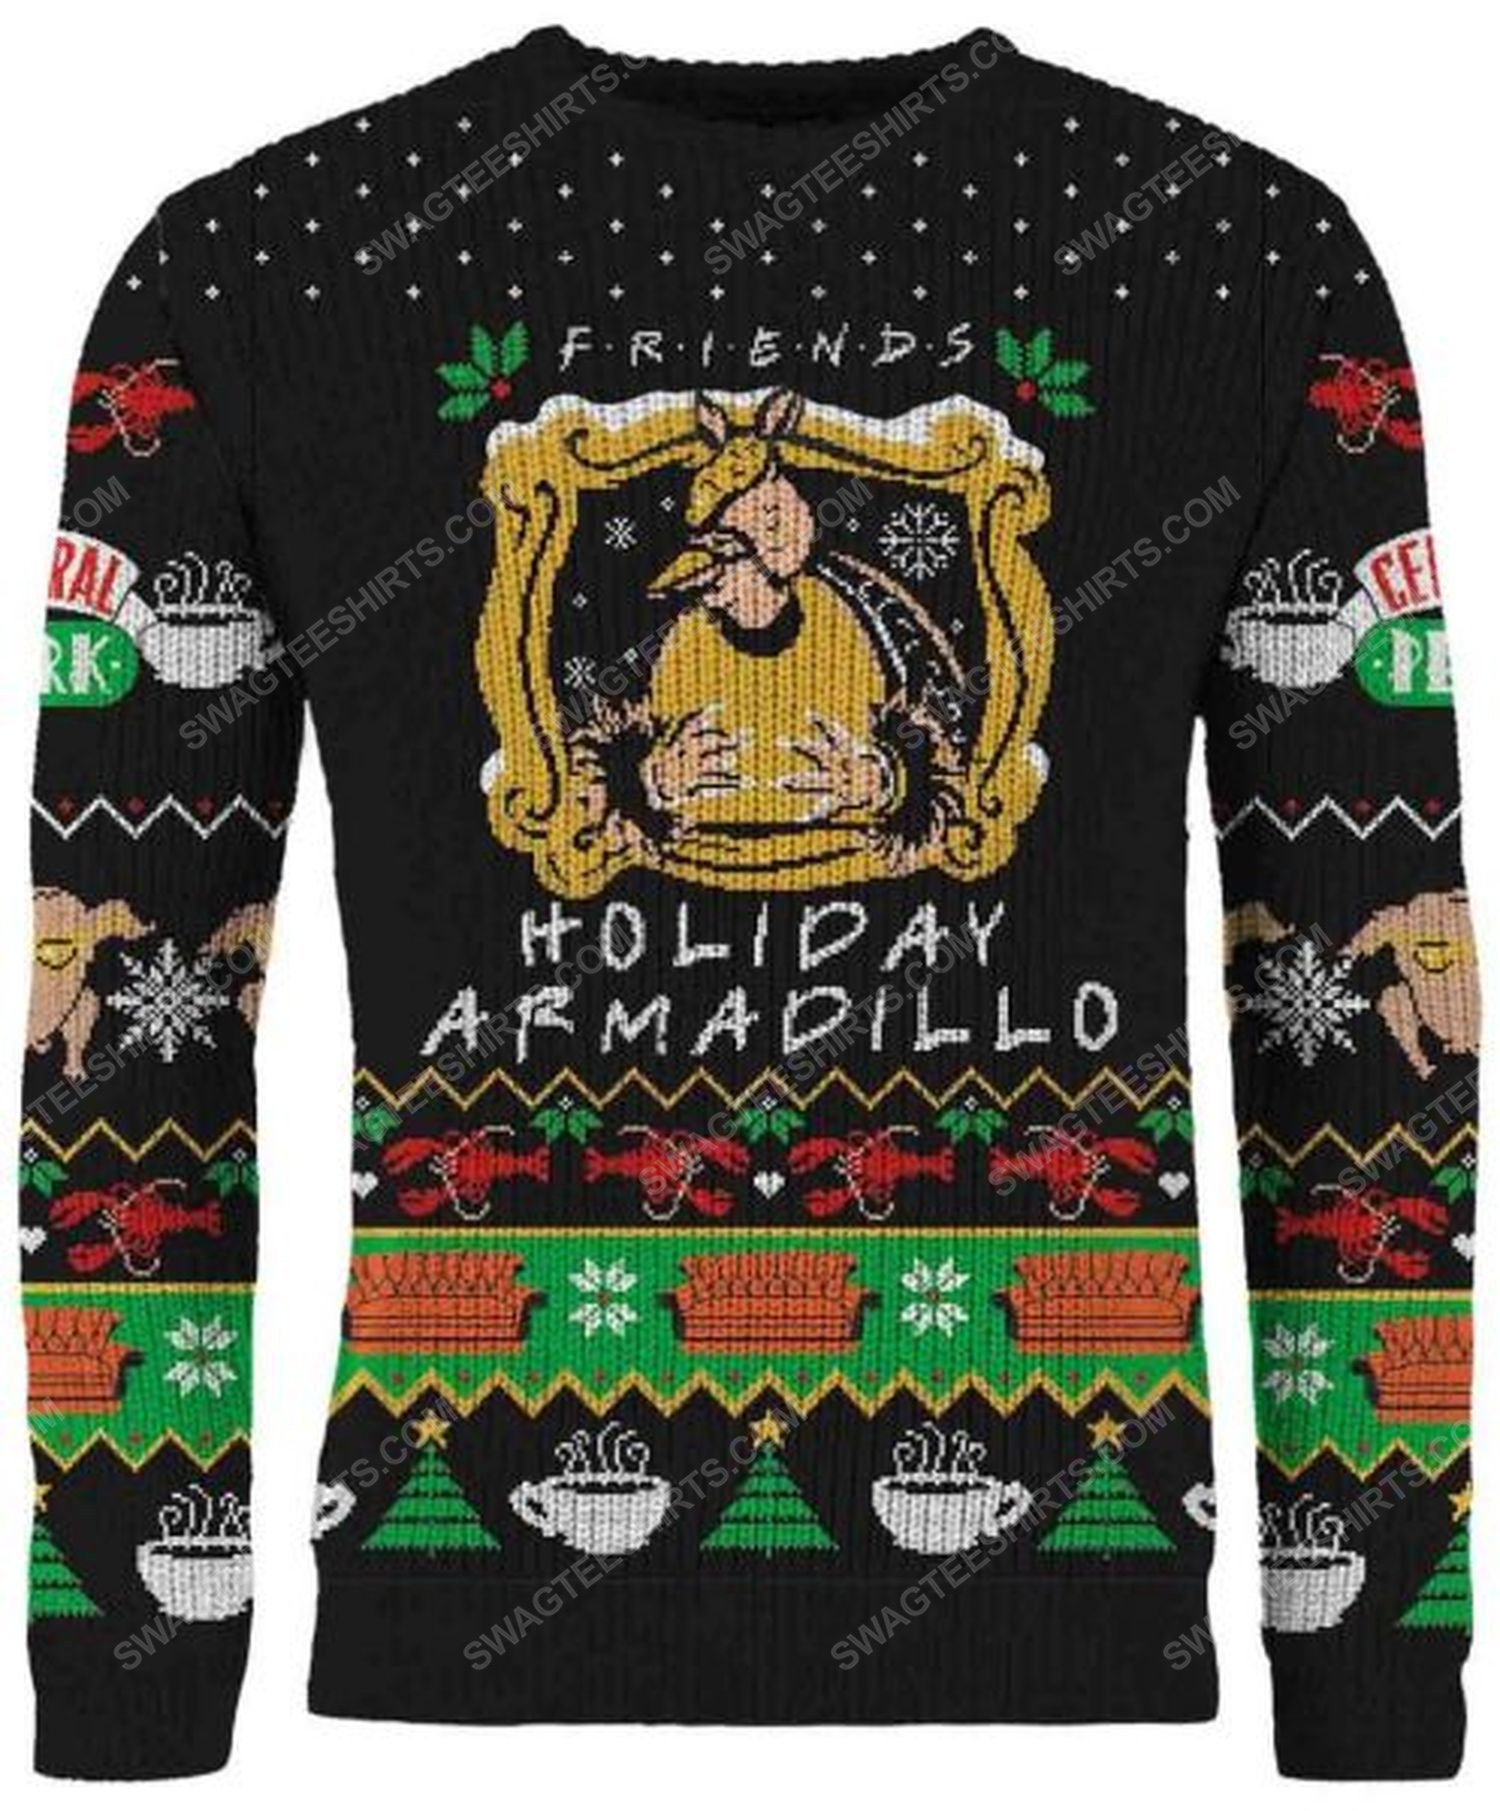 [special edition] TV show friends holiday armadillo full print ugly christmas sweater – maria